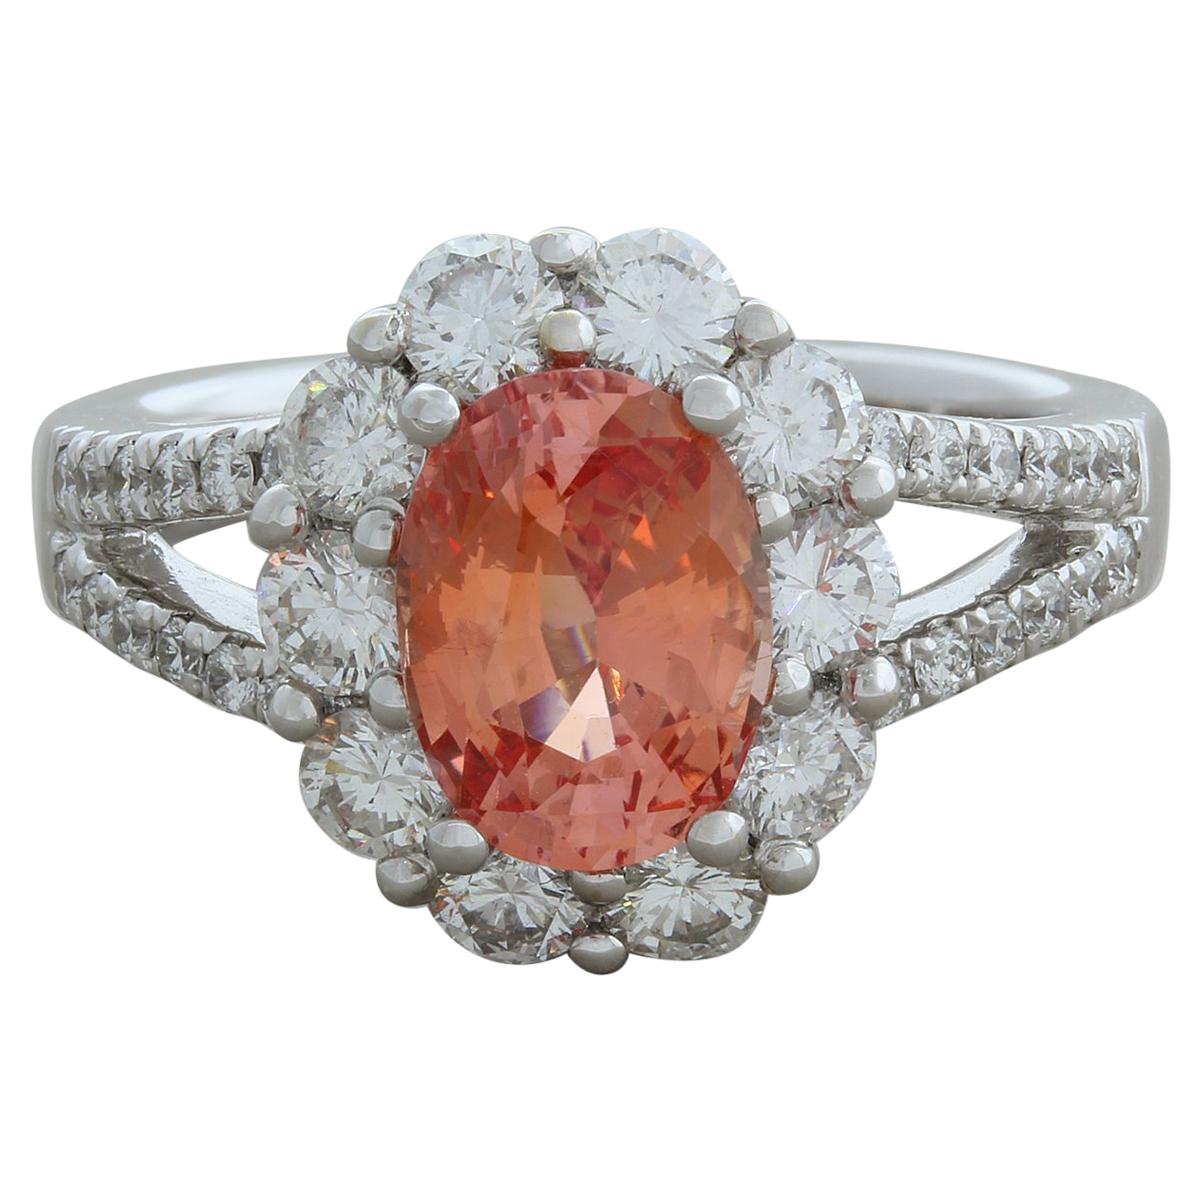 Padparadscha Sapphire Diamond Gold Ring, GIA Certified